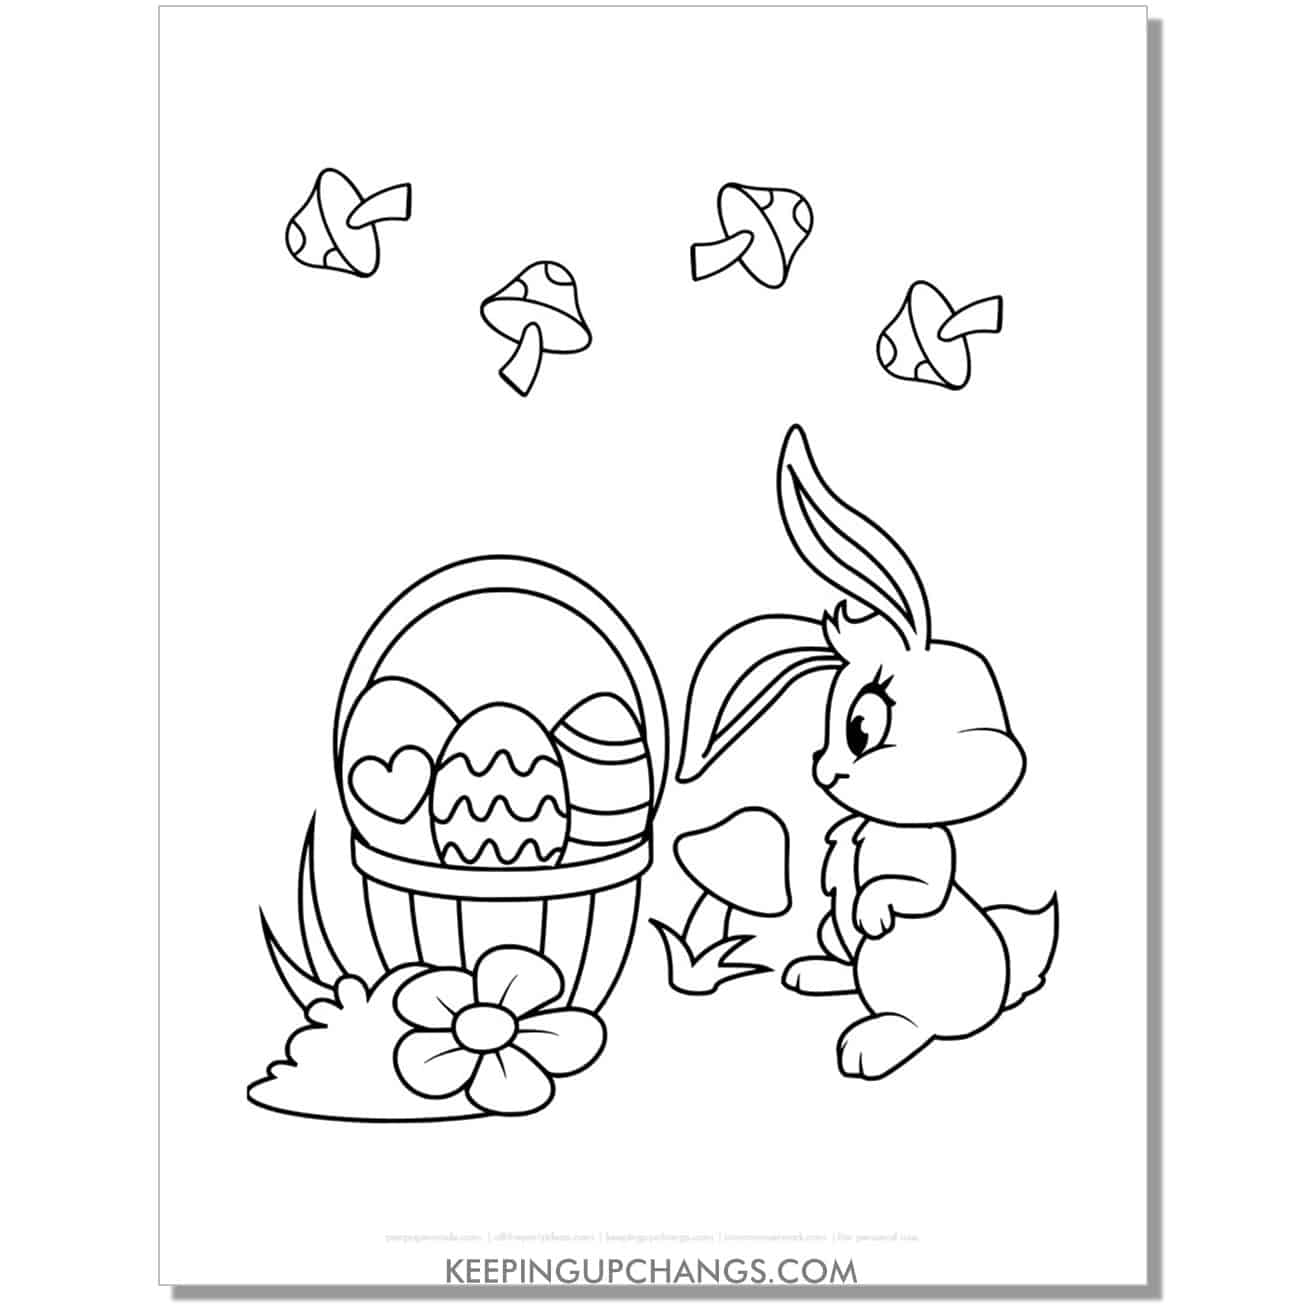 cute easter bunny with mushrooms, basket of eggs coloring page, sheet.